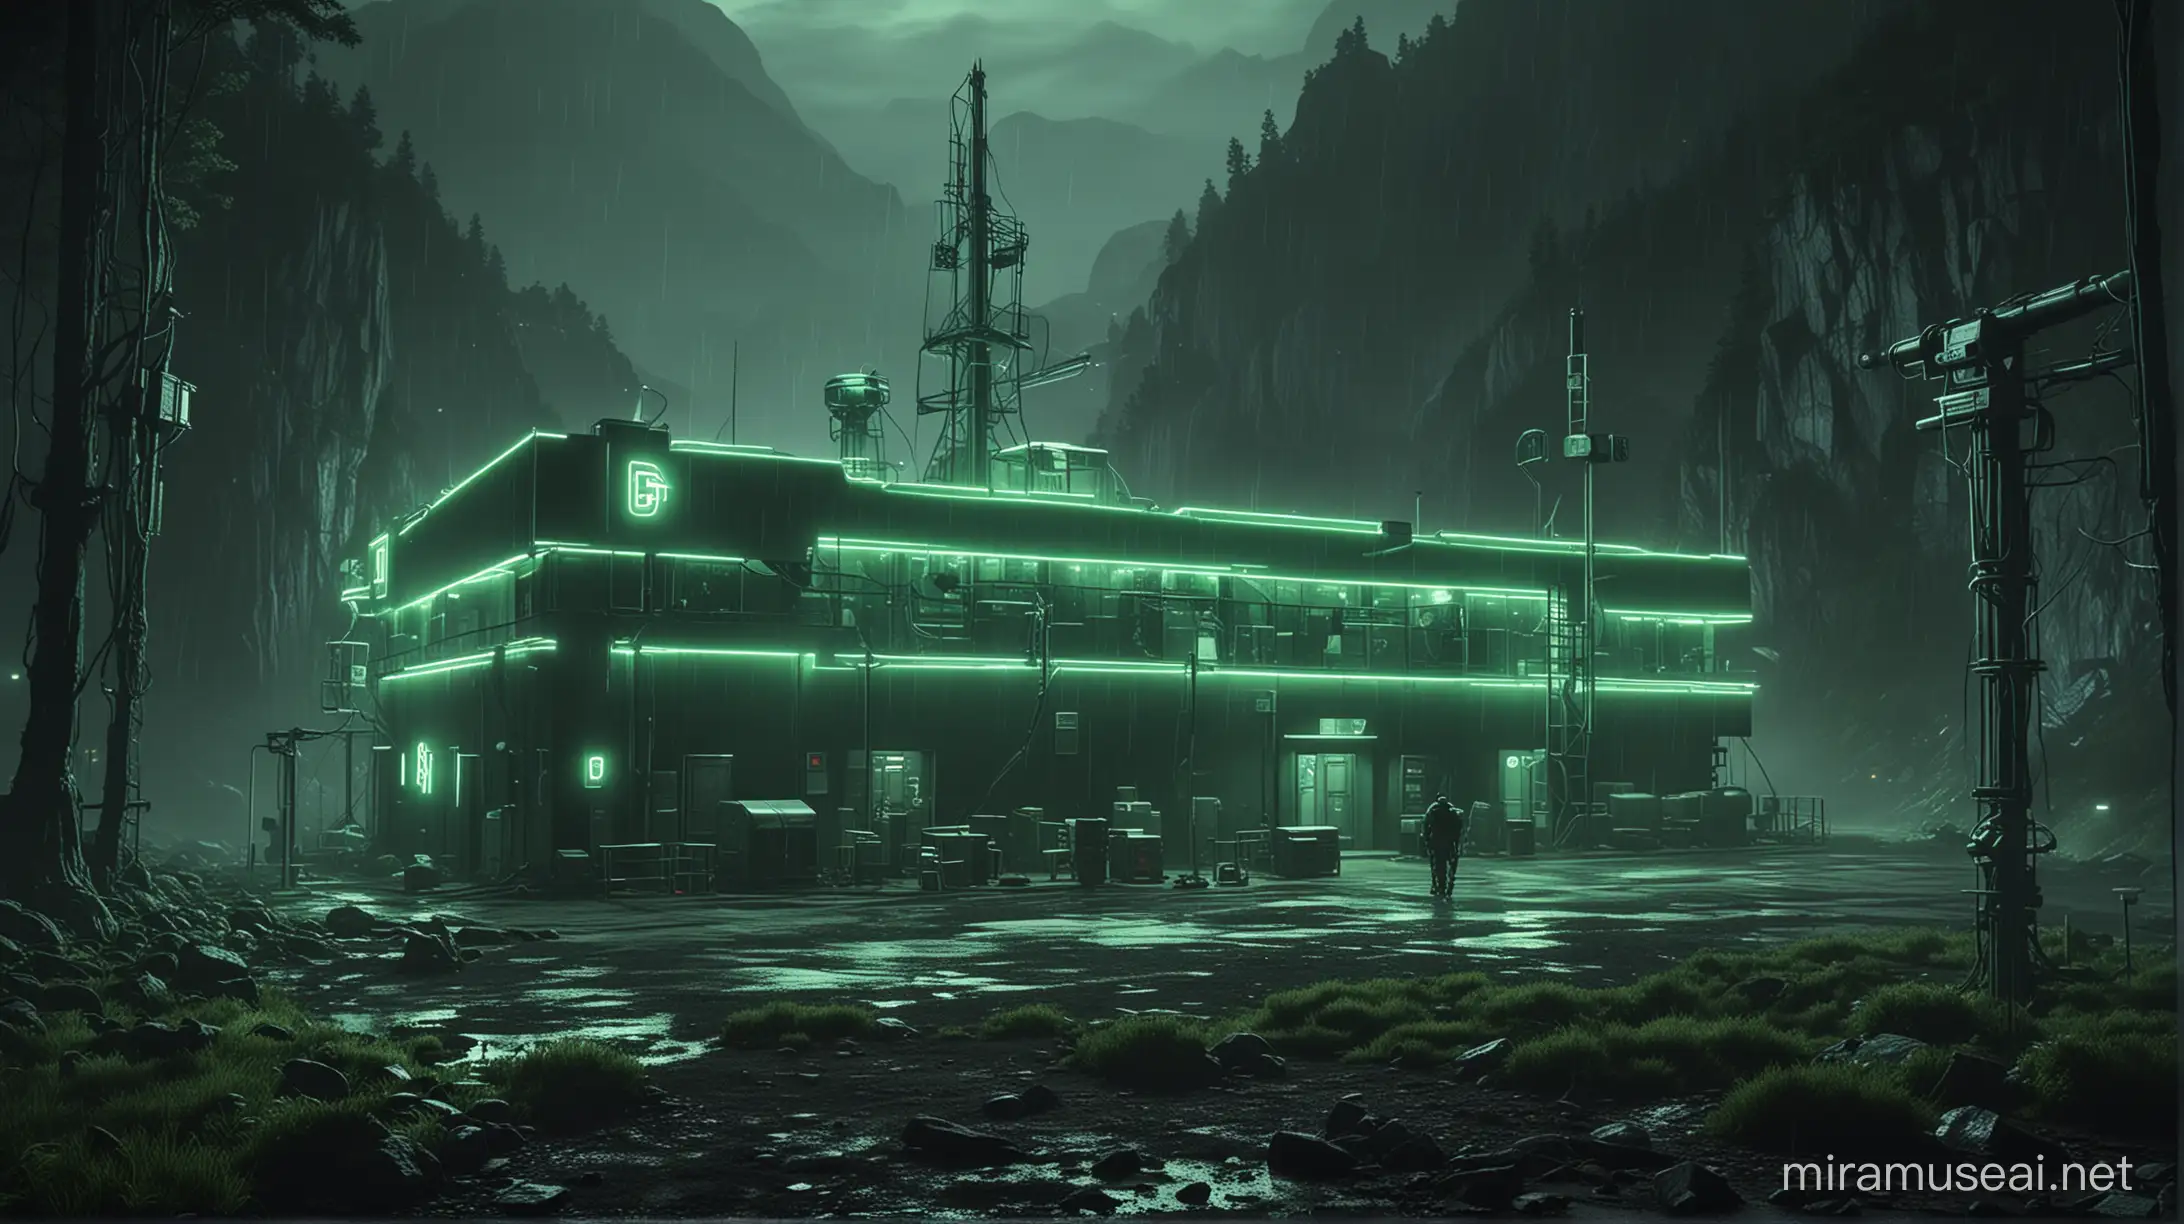 Realistic Research Center in Rain with Green Neon Lights and Workers